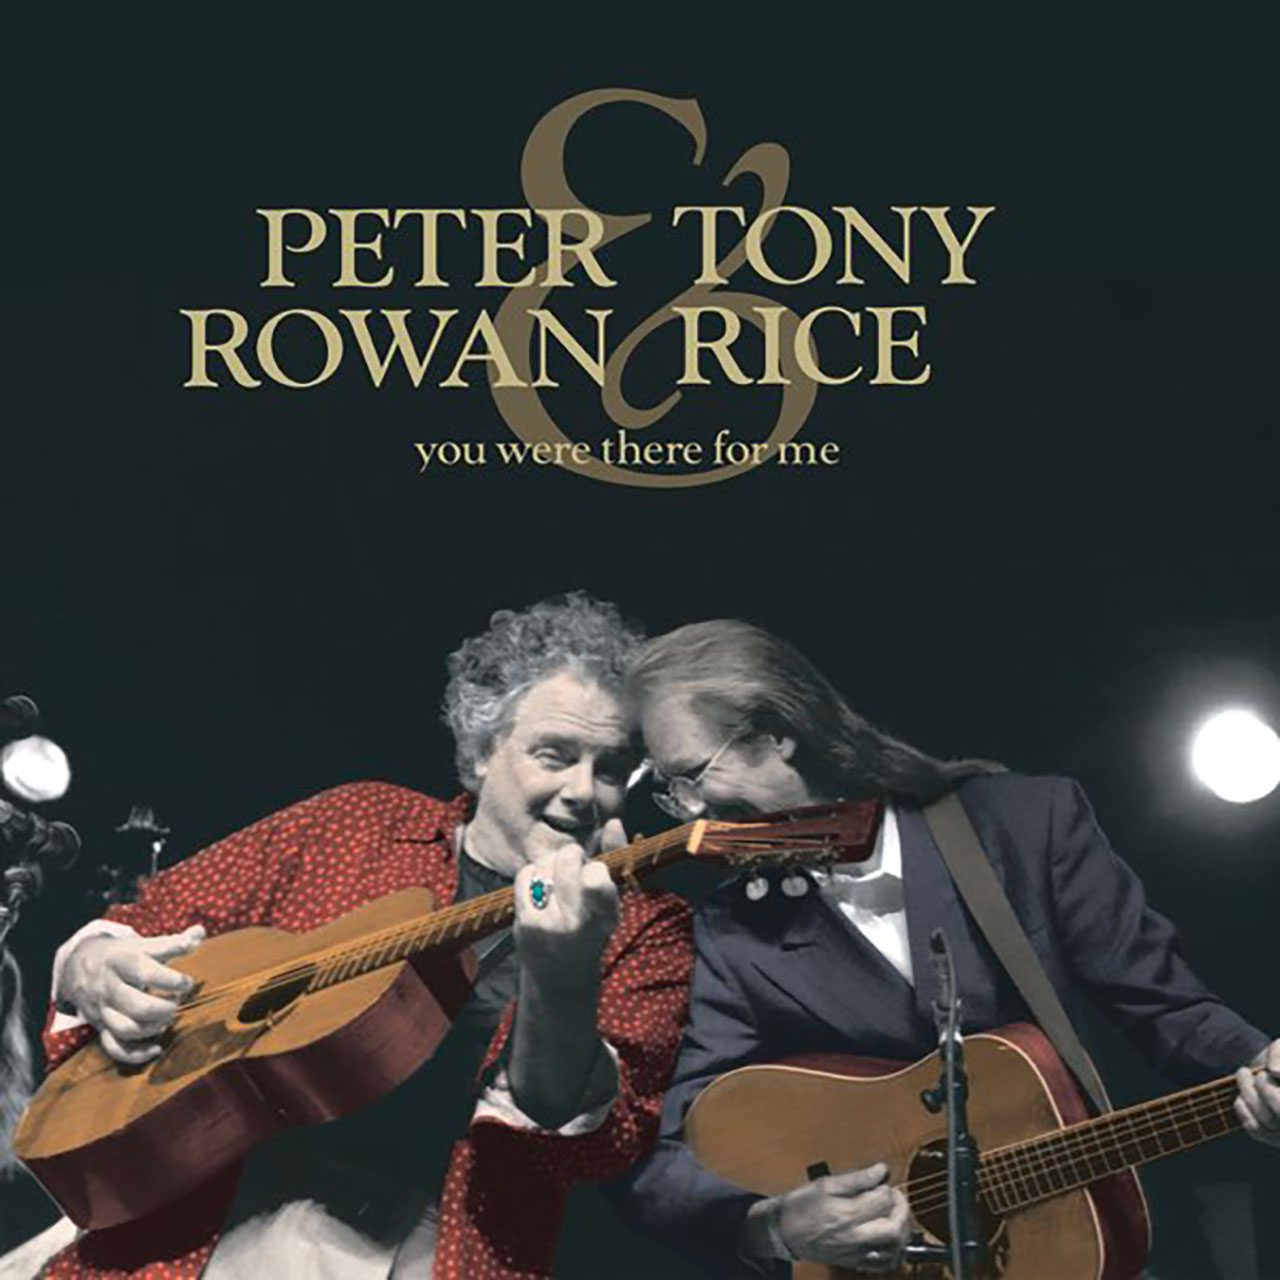 Peter Rowan & Tony Rice – “You Were There For Me” cover album